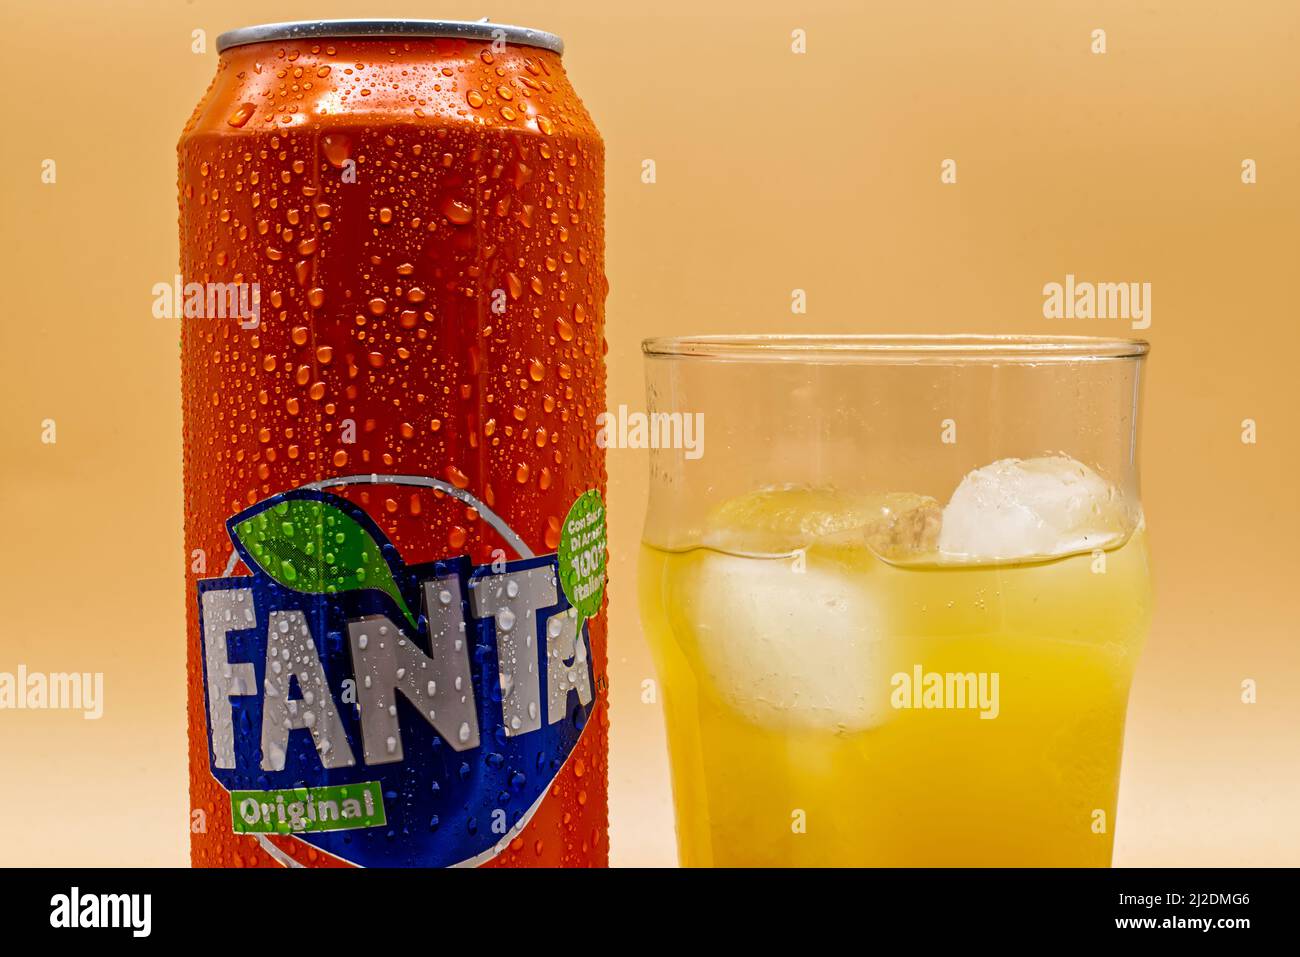 Bologna - Italy - November 17, 2020: Can of Fanta soda, glass and ice isolated on yellow background Stock Photo